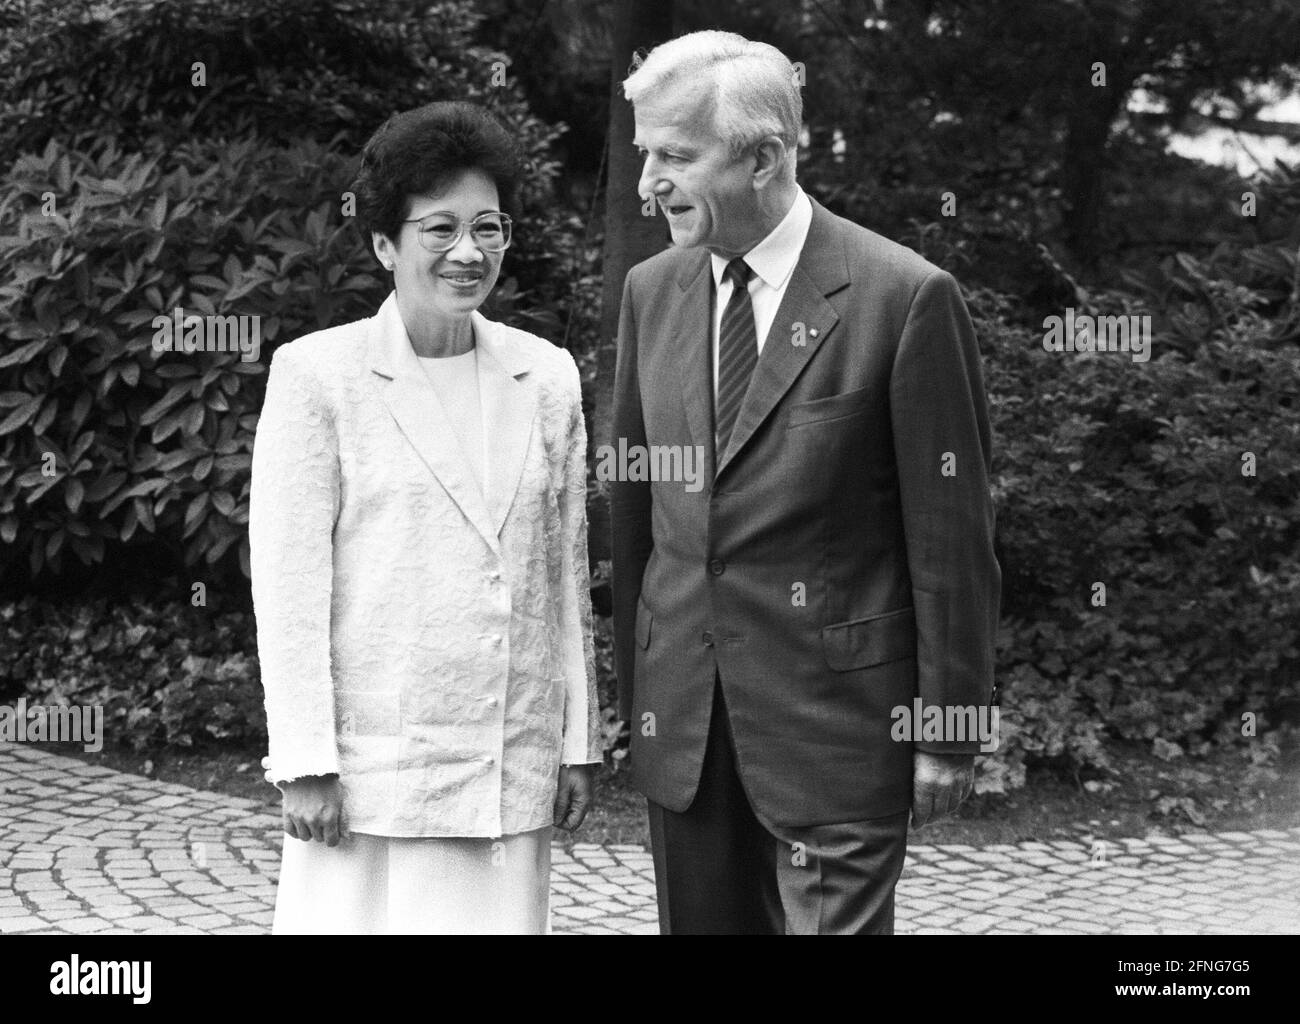 Germany, Bonn, 11.07.1989. Archive No: 07-09-24 State visit of the President of the Philippines Photo: Federal President Richard von Weizsaecker and President Corazon Aquino [automated translation] Stock Photo